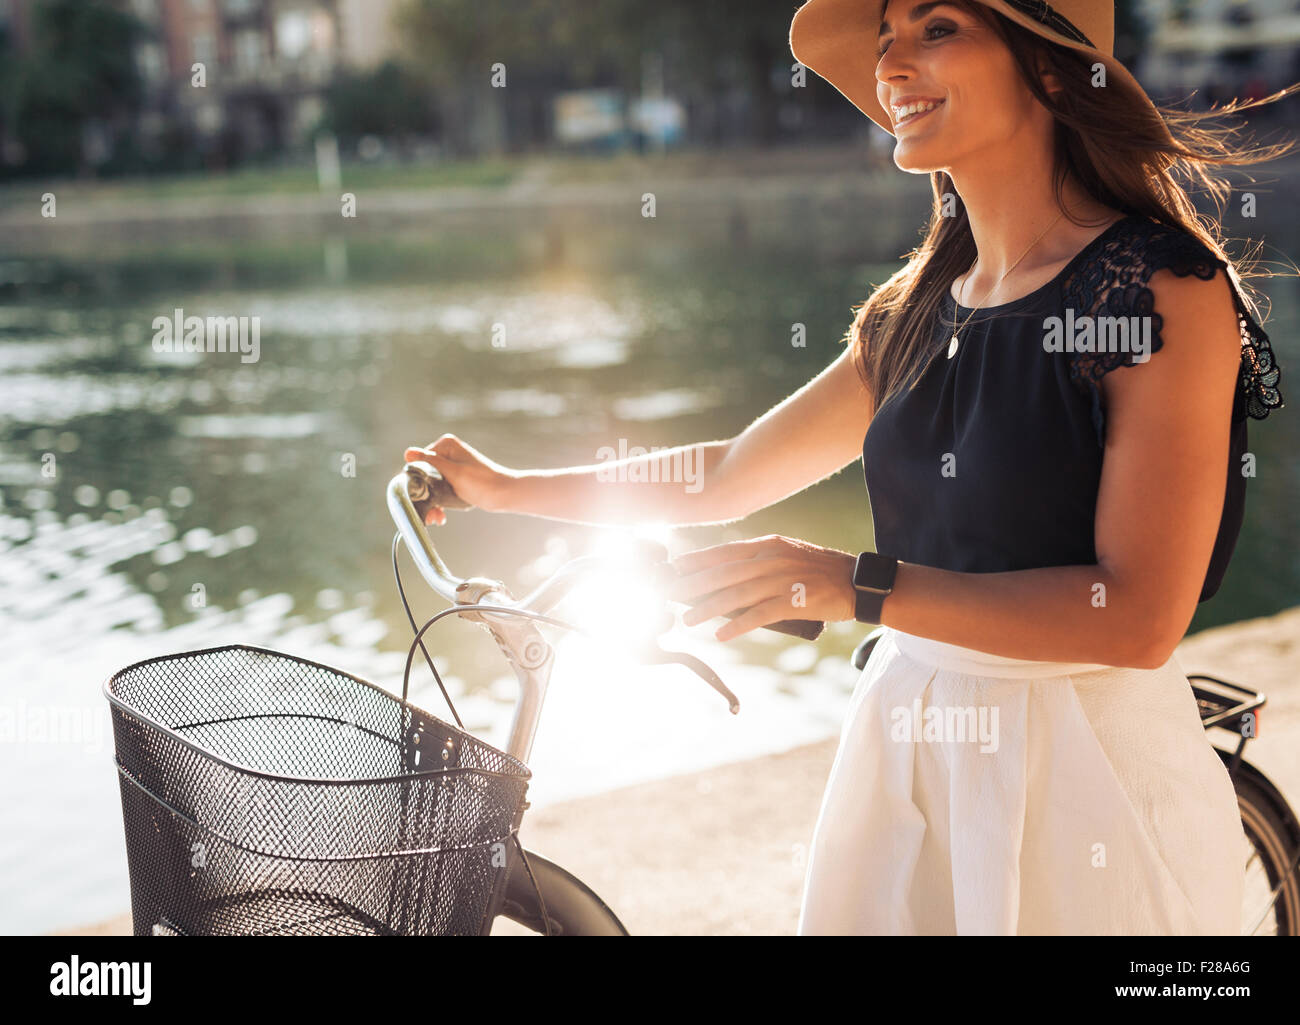 Cheerful young female at the park with her bicycle. Female model wearing hat looking away smiling while walking along a pond. Stock Photo